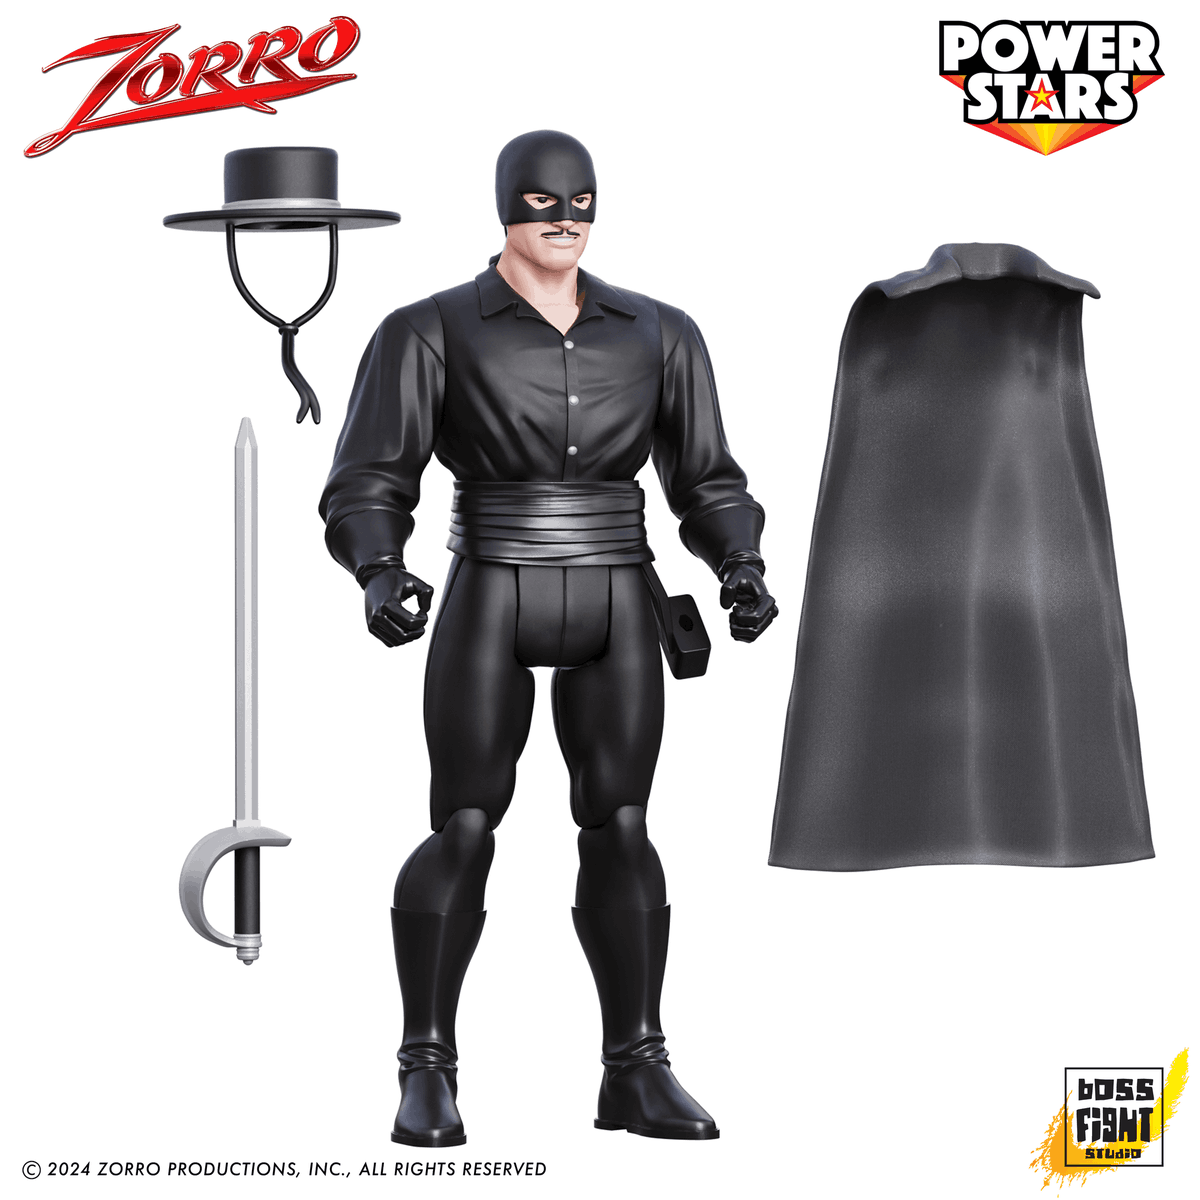 BIG REVEAL! Out of the night when the full moon is bright! The next wave of Power Stars Retro Action Figures is Zorro ’57! The beloved, classic TV series is celebrated for the first time with articulated action figures! Preorder yours today tinyurl.com/44u6cv2z